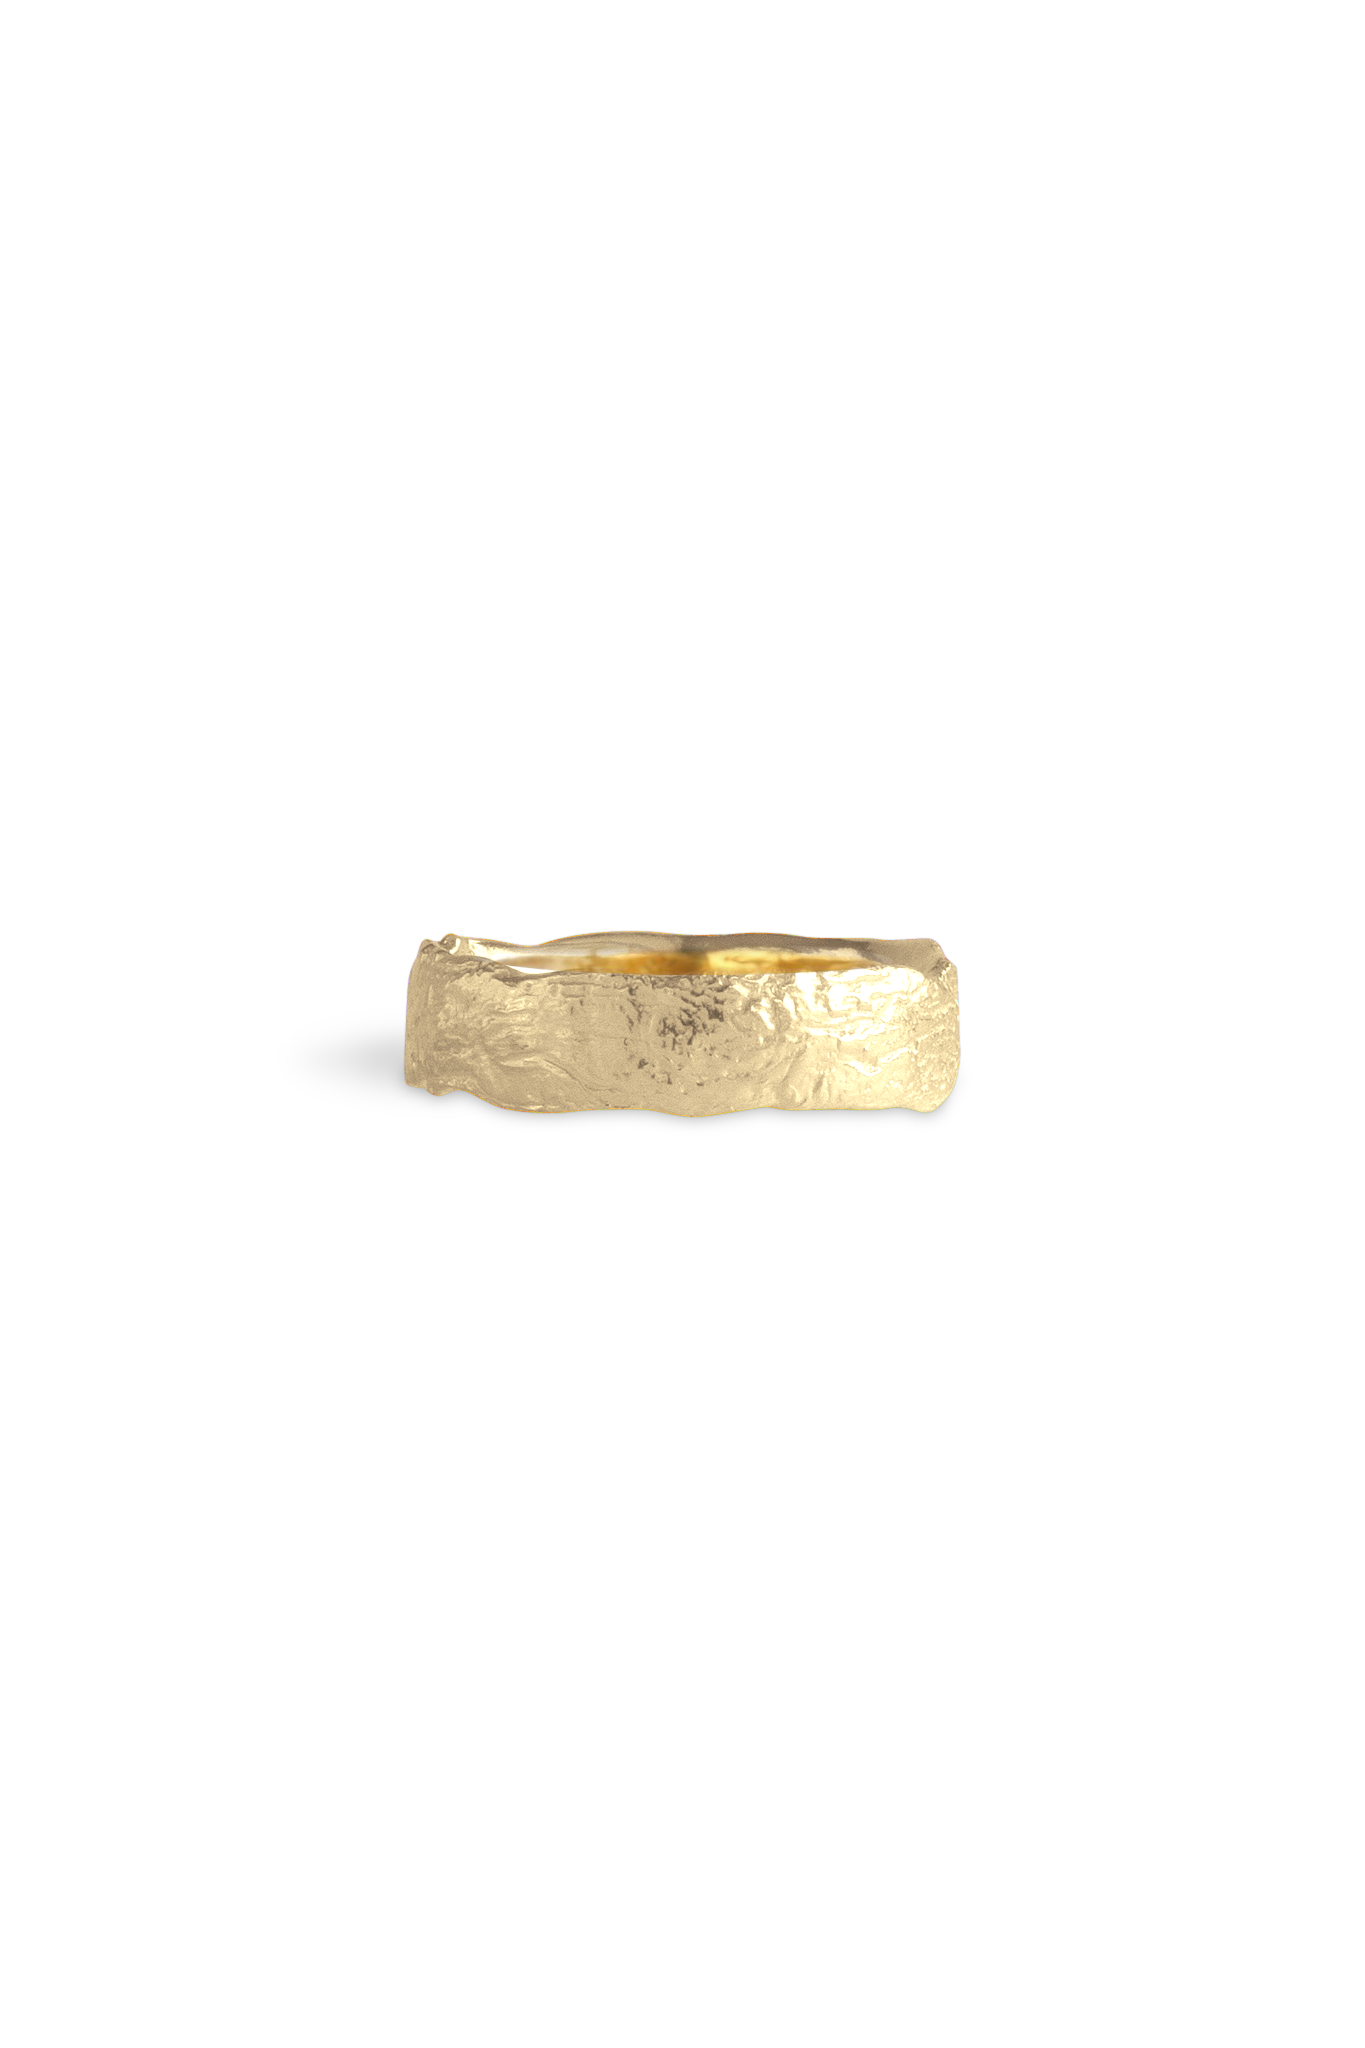 Bermuda Textures ~ Anchor Chain Gold Ring